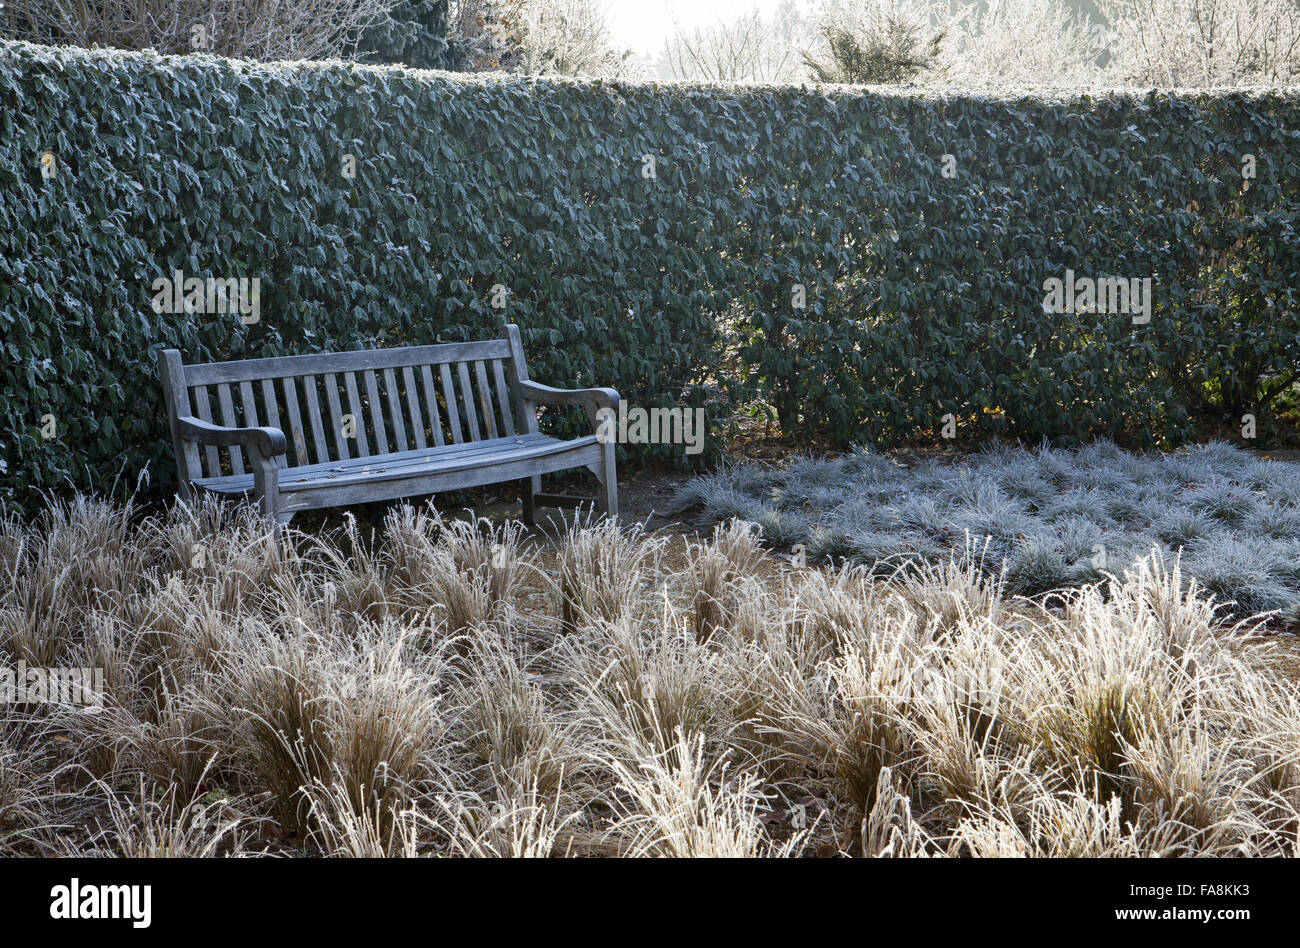 Elaeagnus macrophylla hedge in December at Anglesey Abbey, Cambridgeshire, with Stipa arundinacea, wooden bench and Festuca glauca Stock Photo